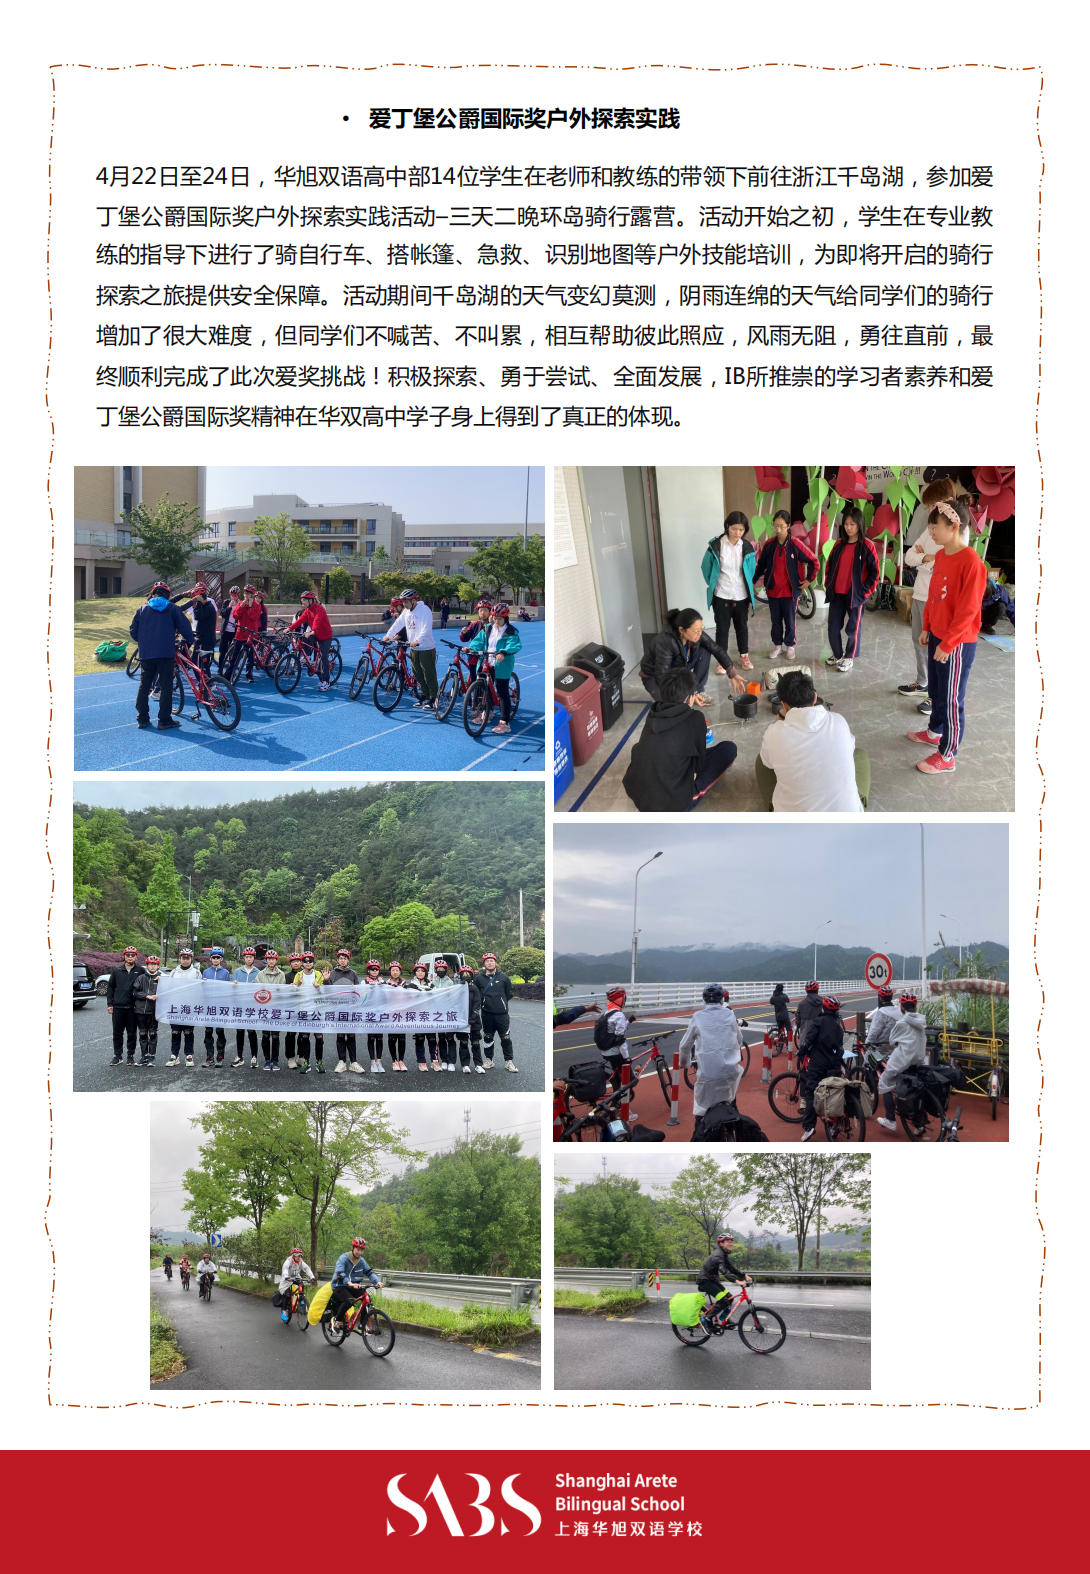 HS 5th Issue Newsletter pptx（Chinese)_02.png